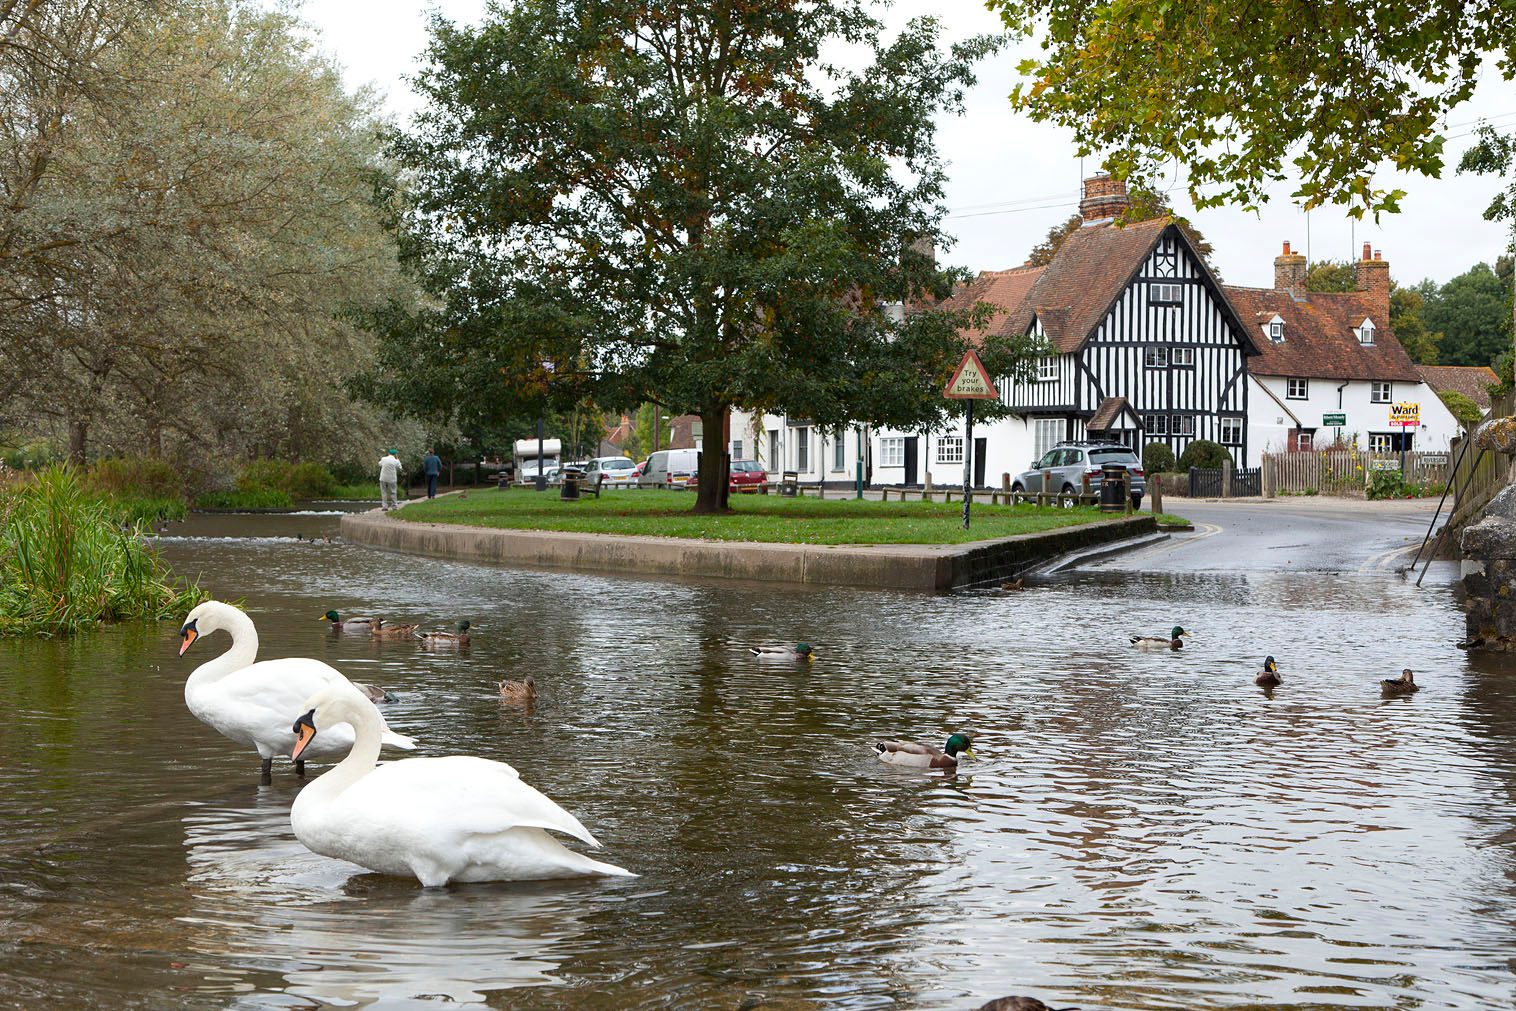 Riverside on village green, with swans and birds swimming, on a sunny day.